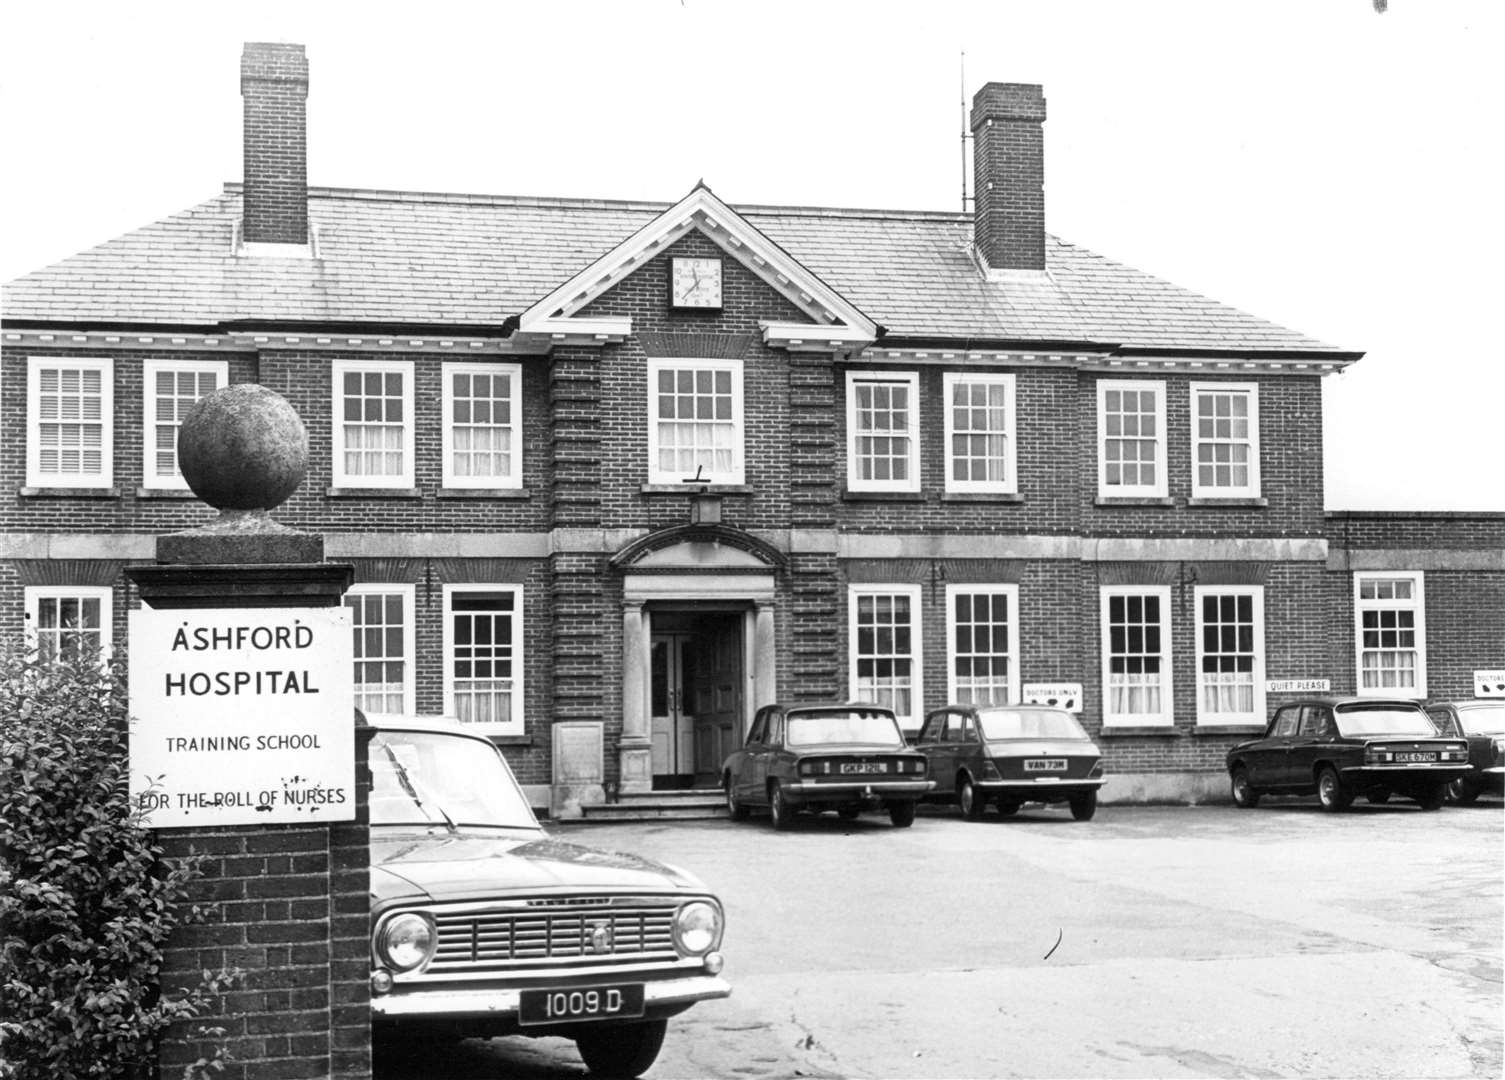 Kings Avenue hospital in Ashford pictured in 1974. The hospital was downgraded in 1978 when the new William Harvey Hospital at Willesborough opened but services remained until about 1993